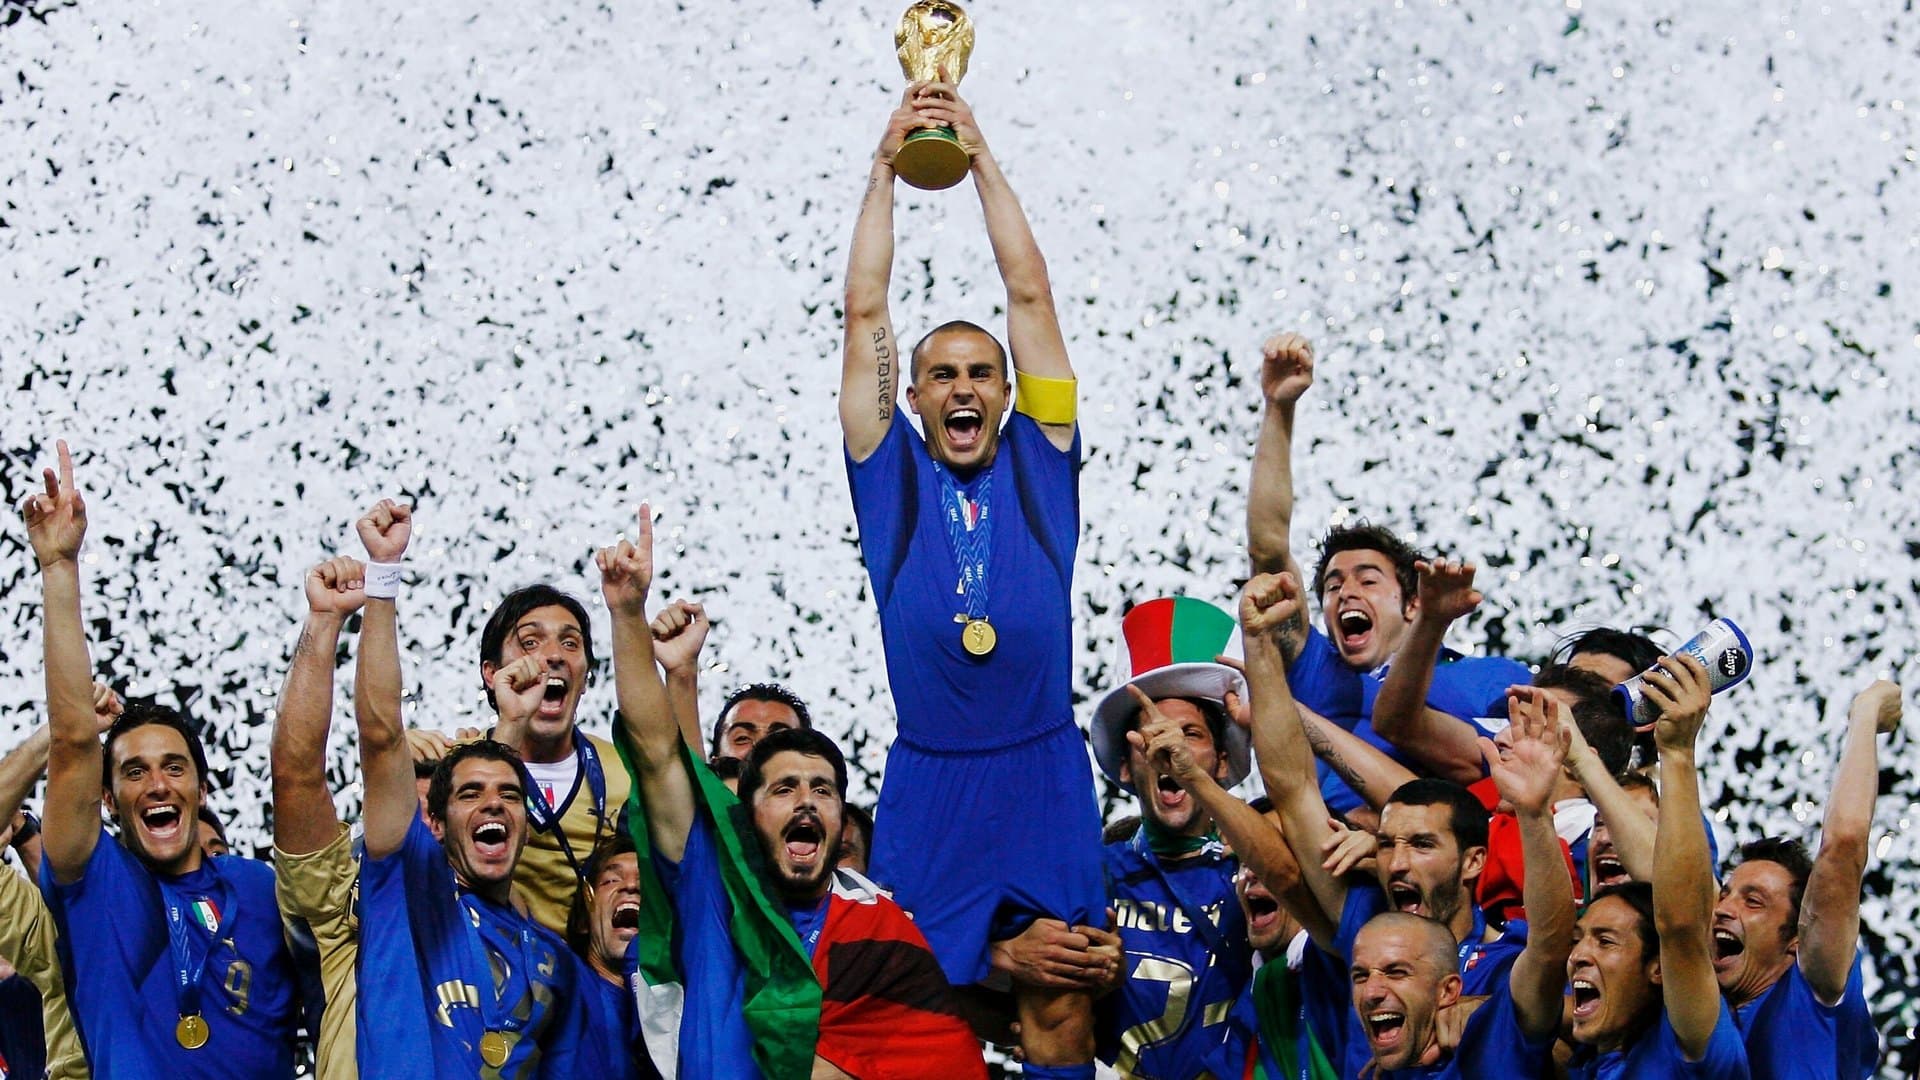 Italy-Best Soccer Countries in the World